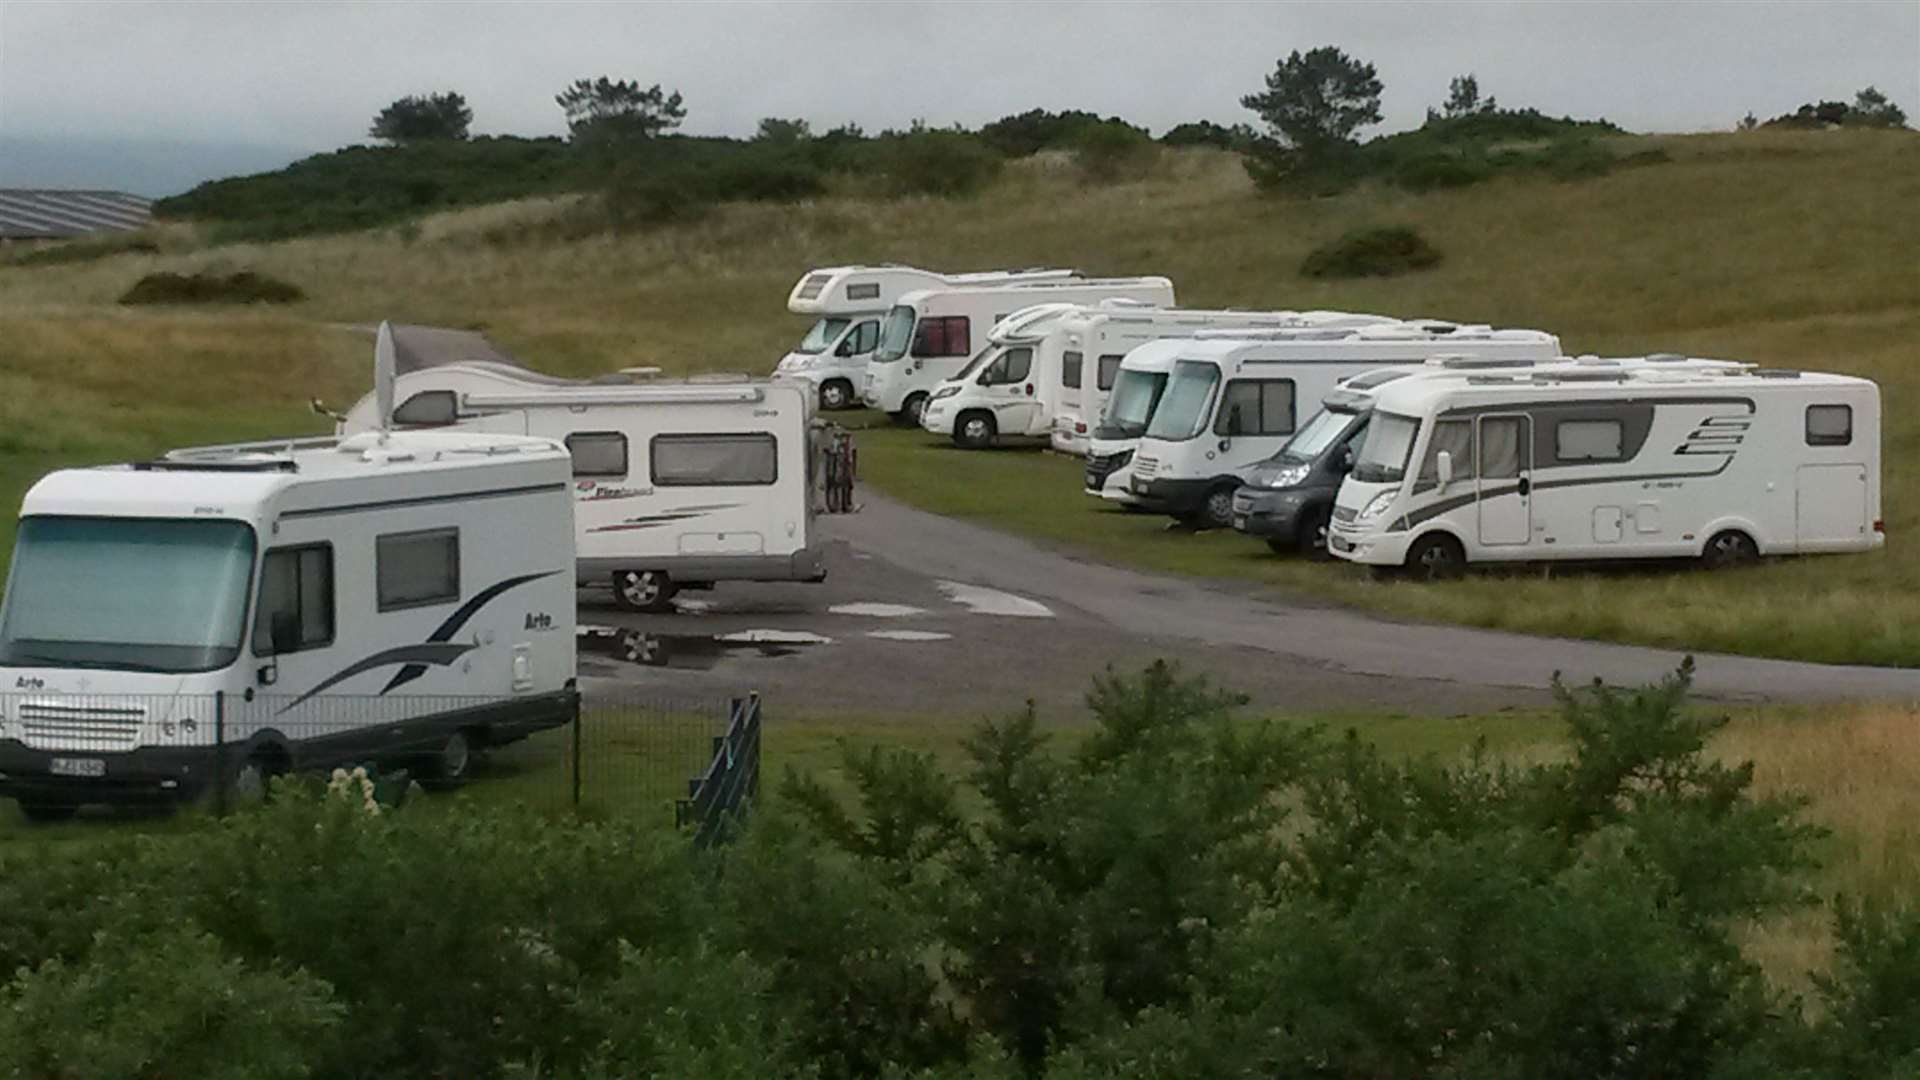 An increasing number of motorhome and campervan users are visiting Sutherland, attracted by tourism route NC500.